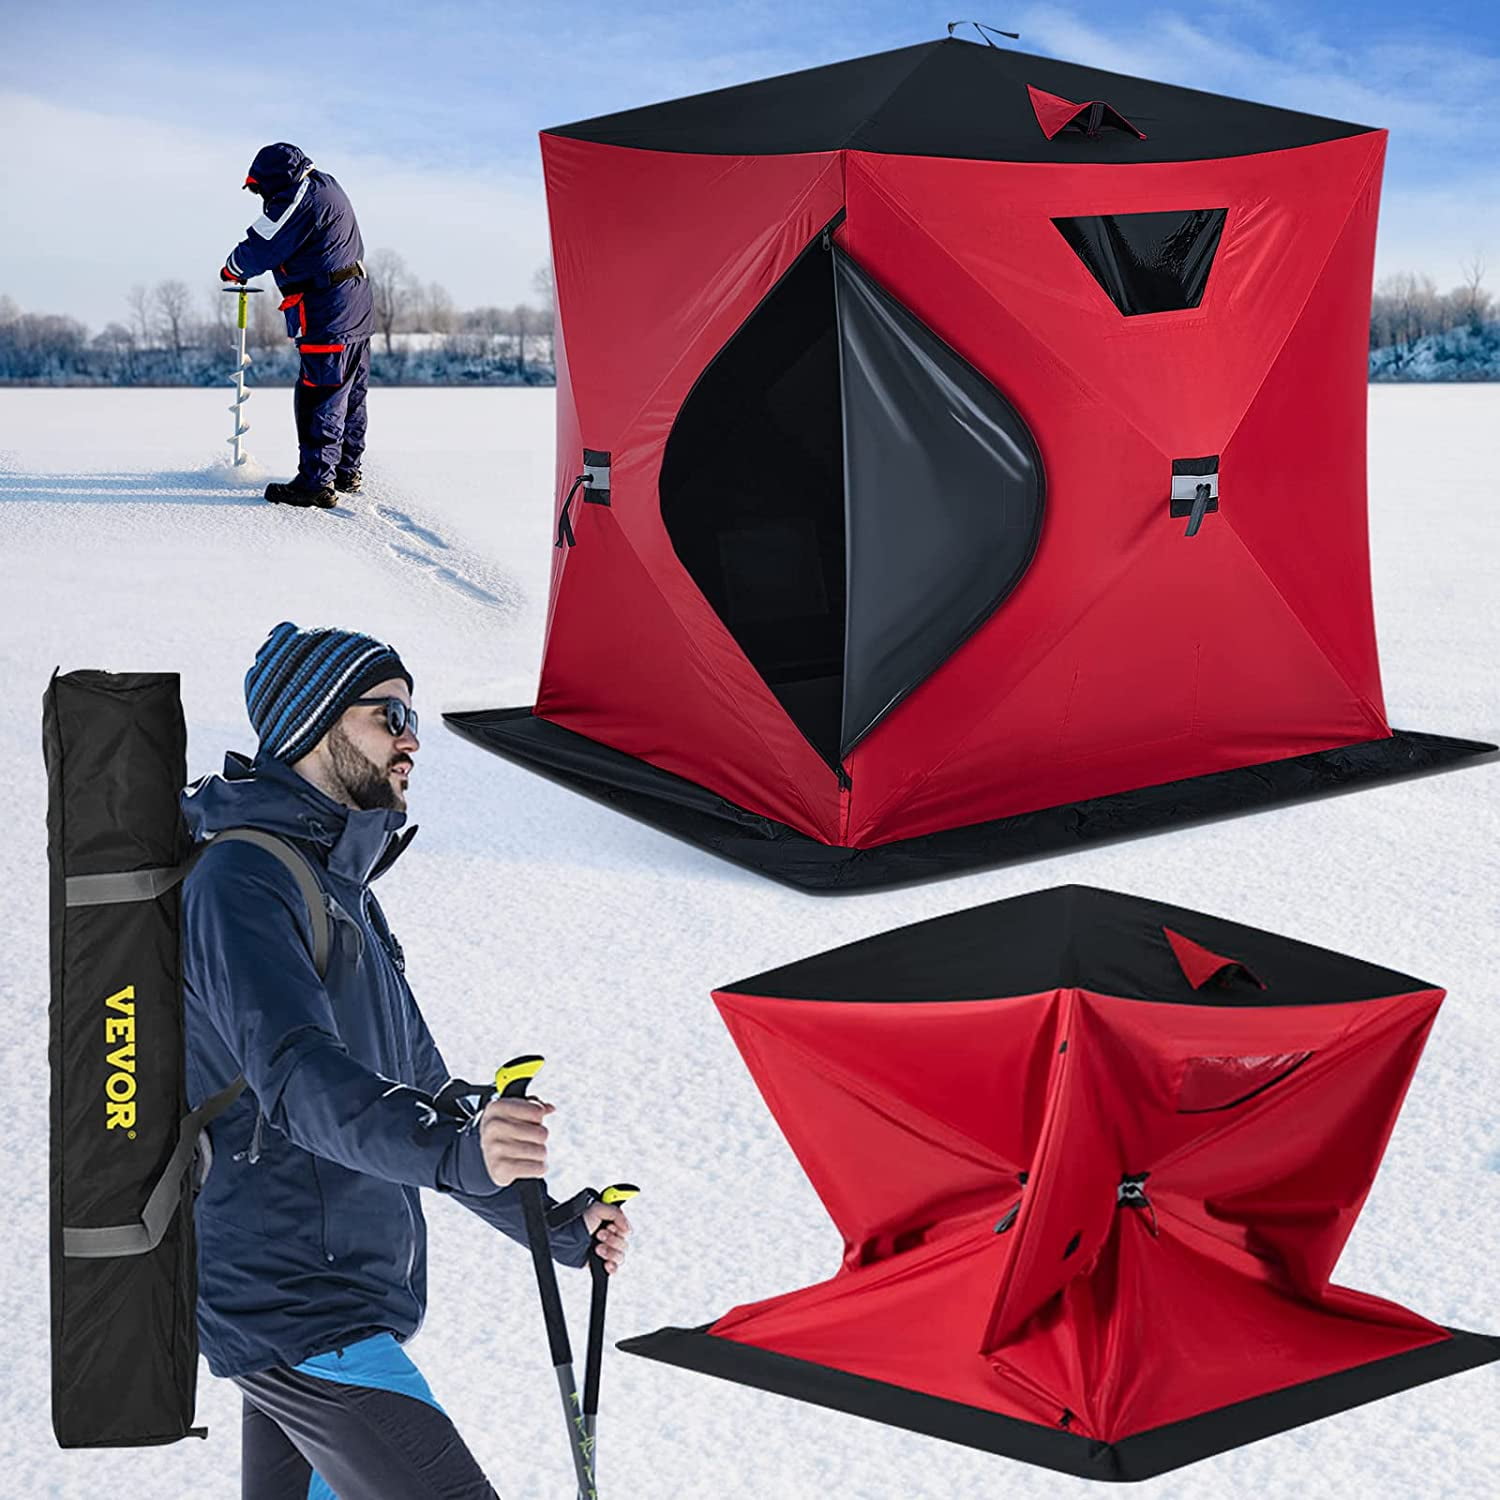 Vevorbrand Waterproof Pop-Up 2-Person Carrying Bag Ice Fishing Shelter with Detachable Ventilation Windows, 300D Oxford Fabric Zippered Door Shanty